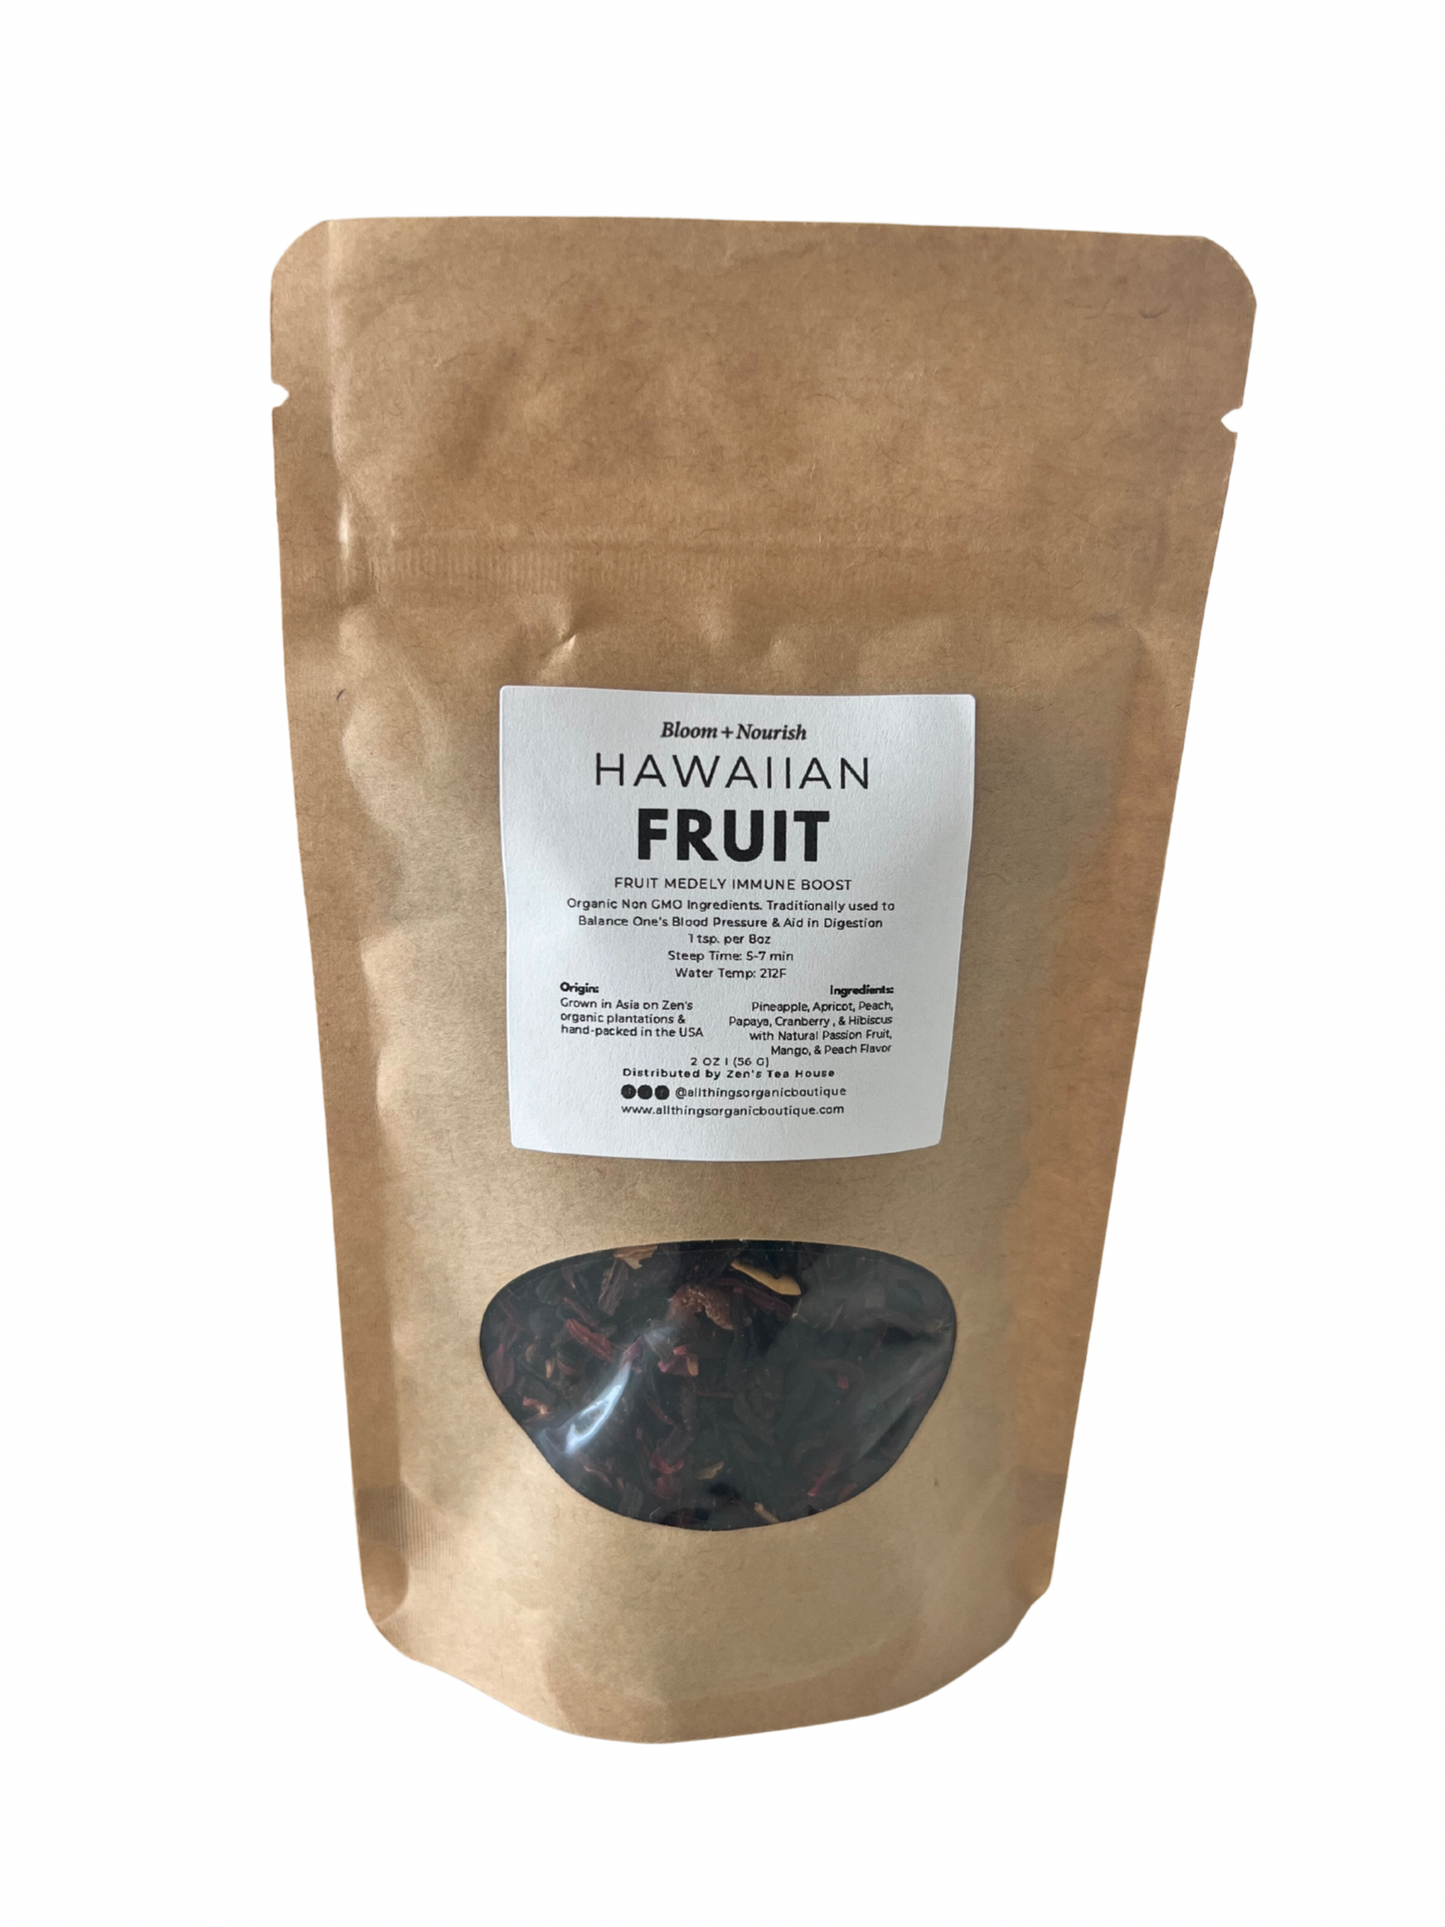 Hawaiian Fruit Loose Leaf Organic Tea is a delicious bouquet of Hibiscus and dried tropical fruit